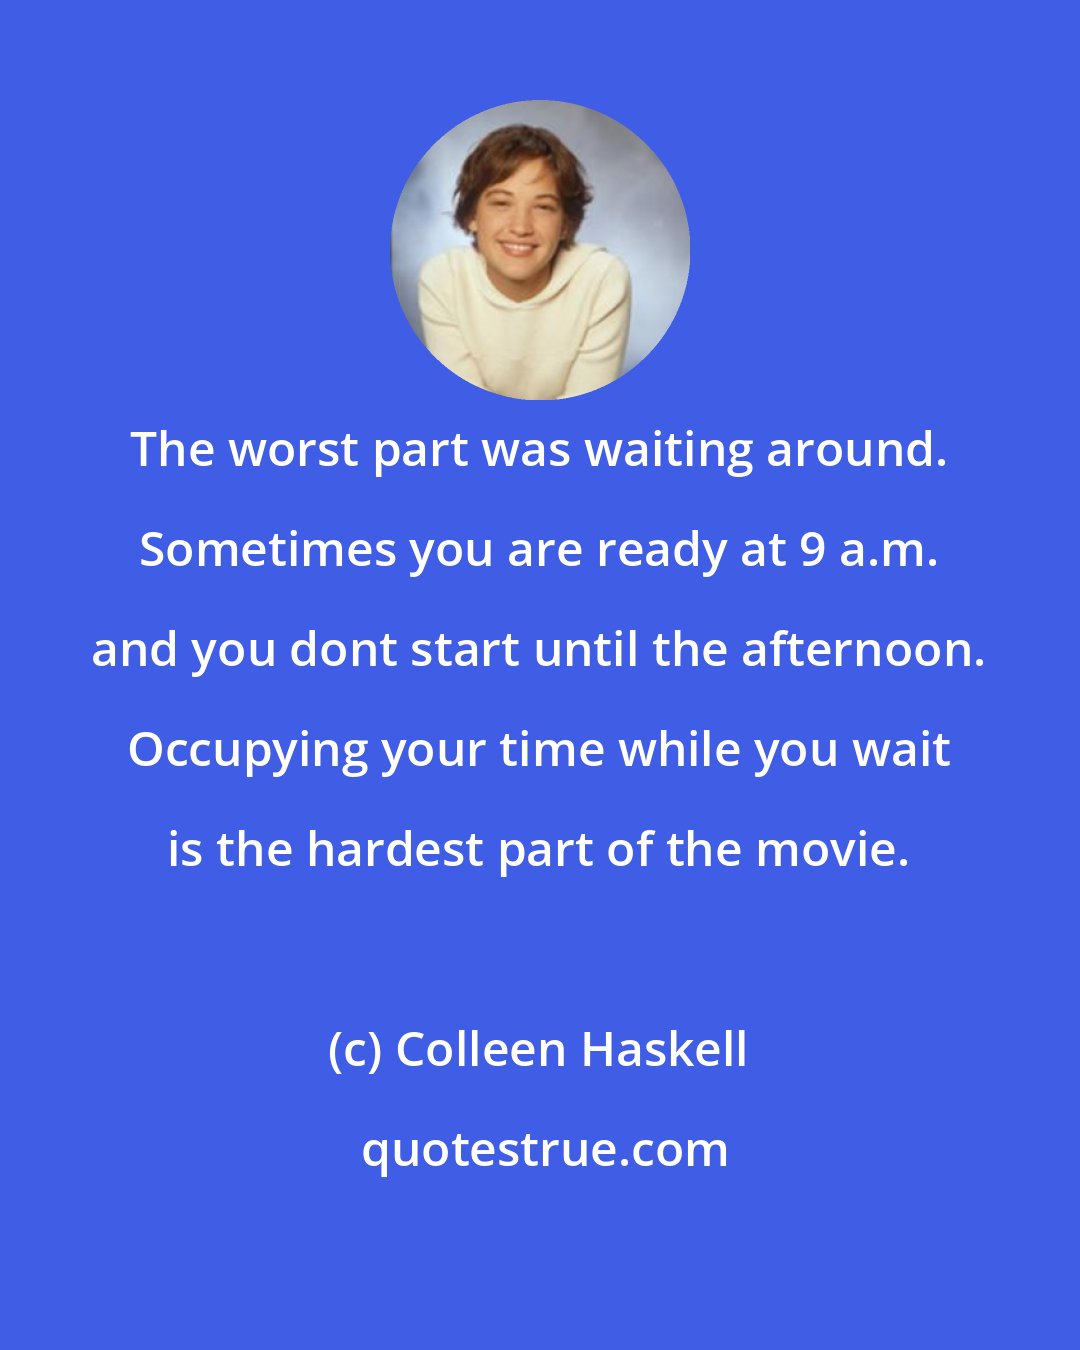 Colleen Haskell: The worst part was waiting around. Sometimes you are ready at 9 a.m. and you dont start until the afternoon. Occupying your time while you wait is the hardest part of the movie.